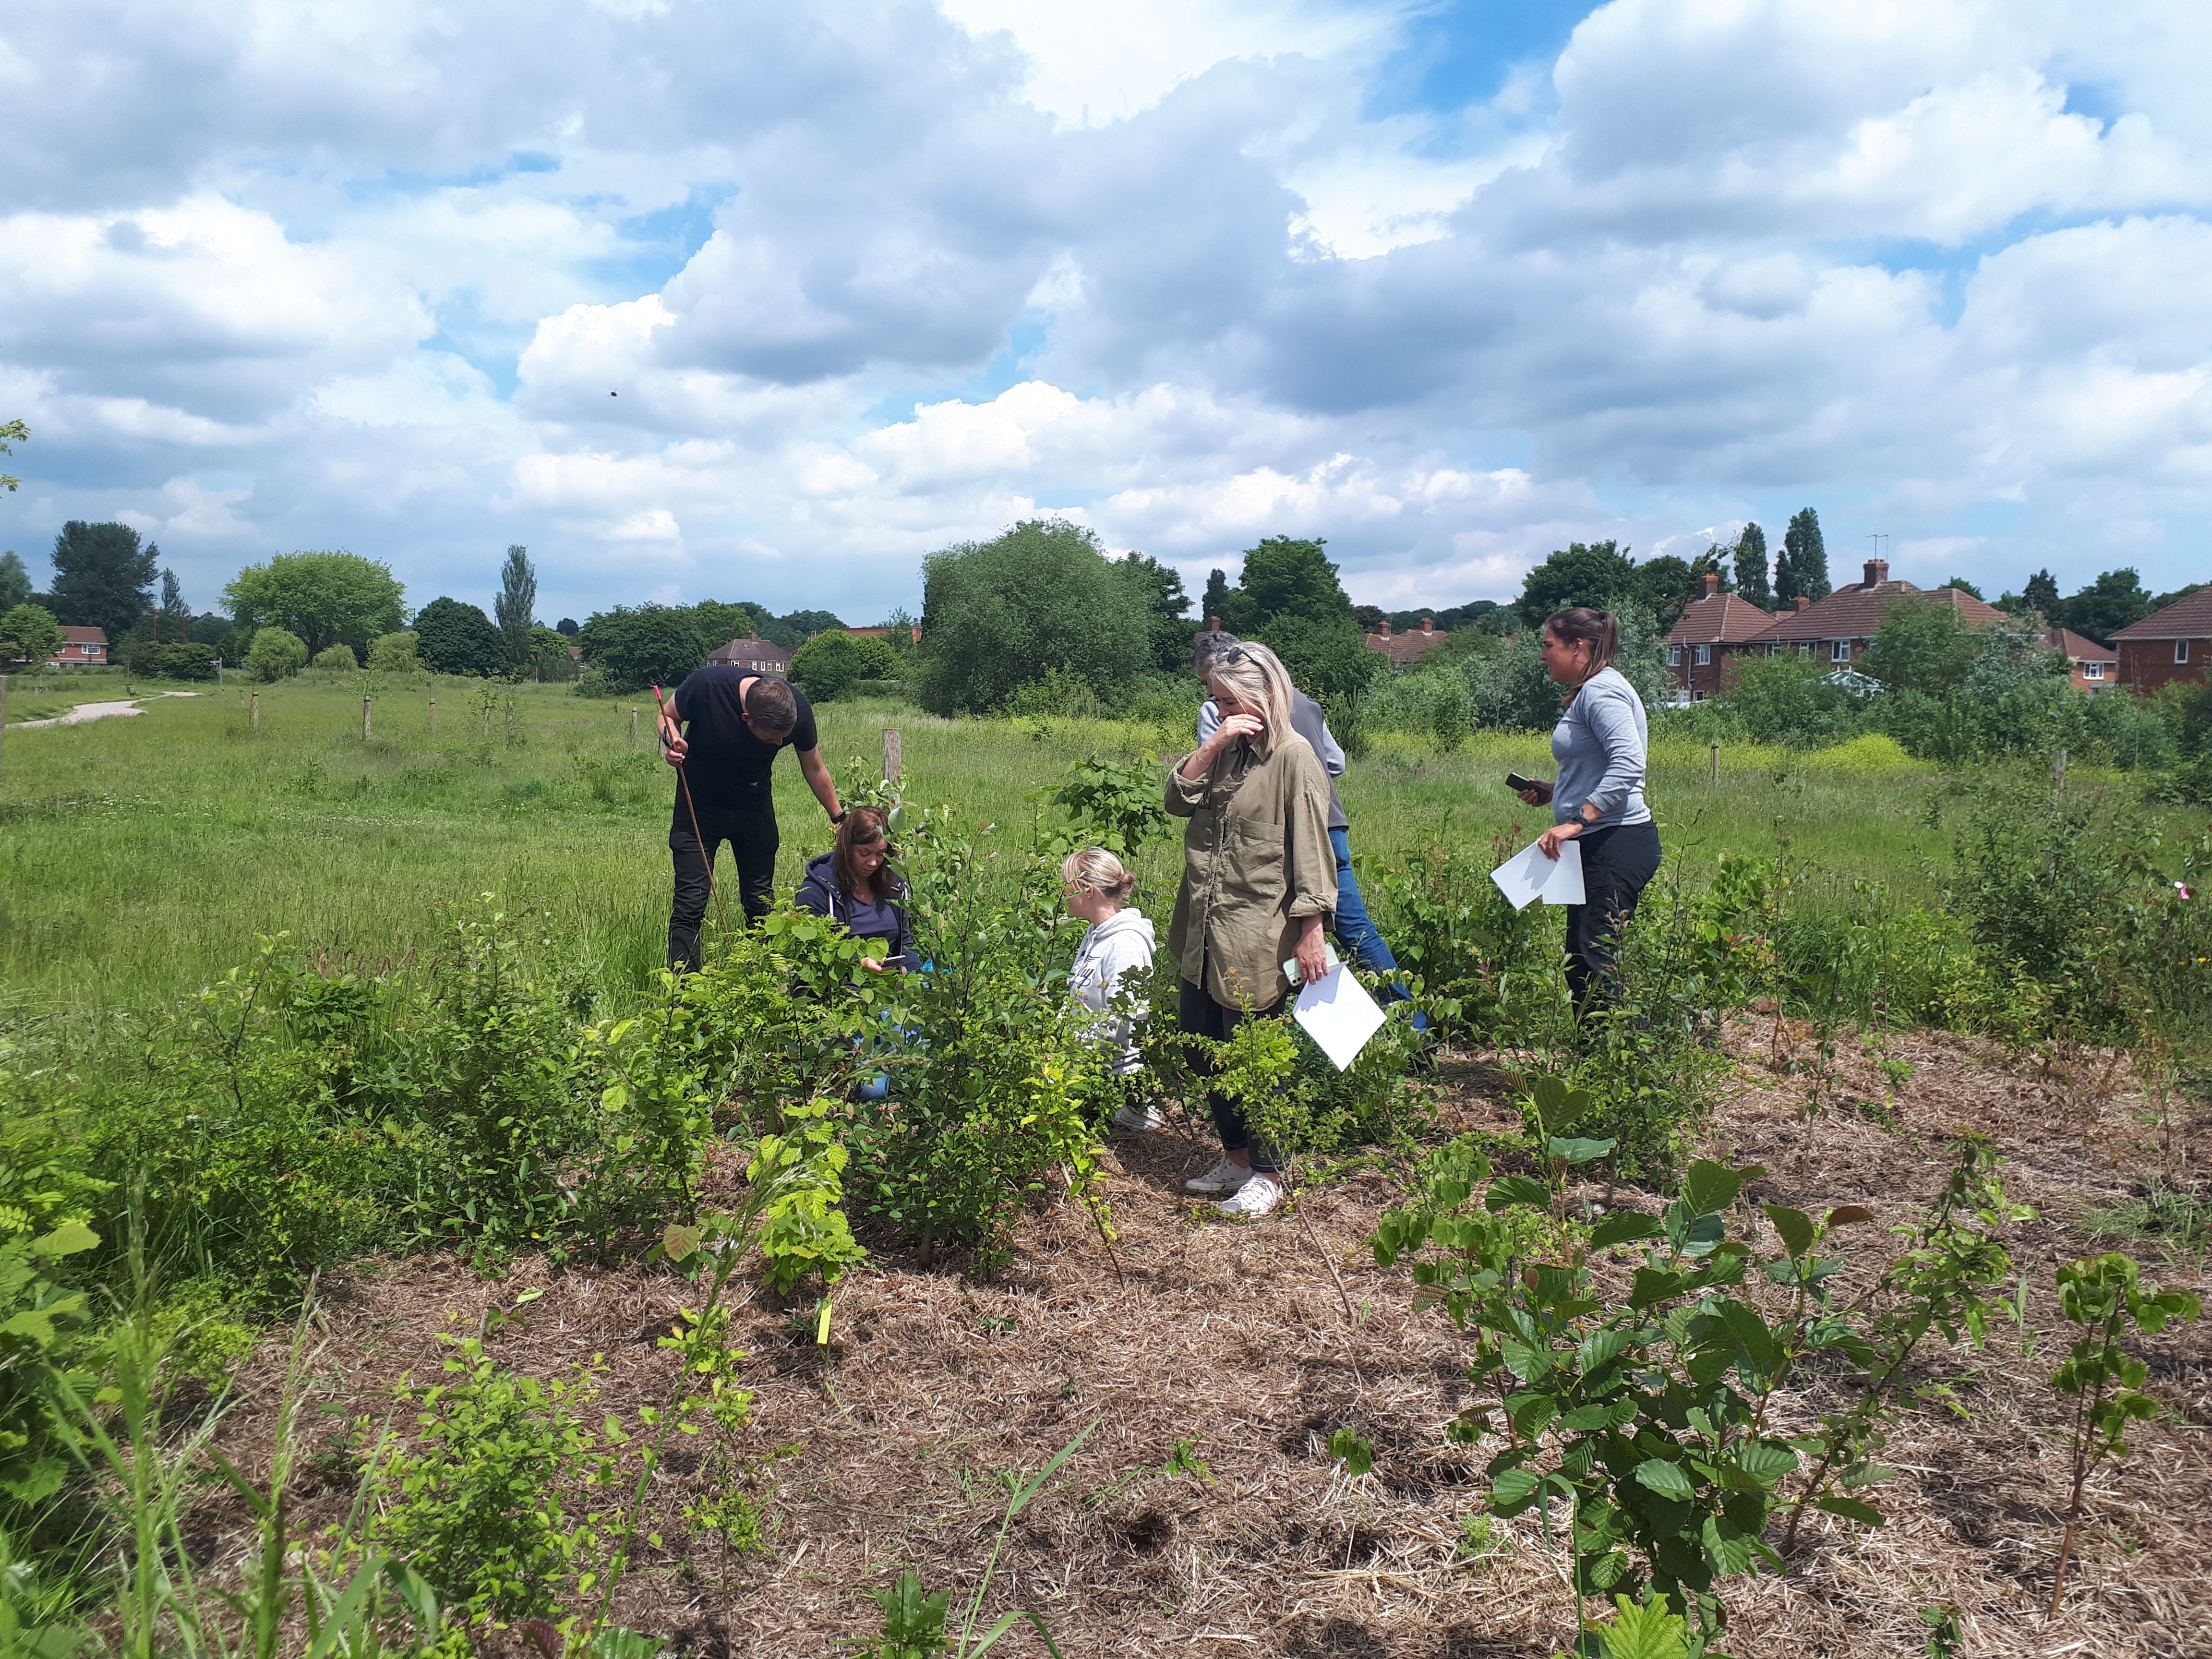 June 2022: Fever Tree Volunteer for Citizen Science Data Collection. Photo credit: Earthwatch Europe